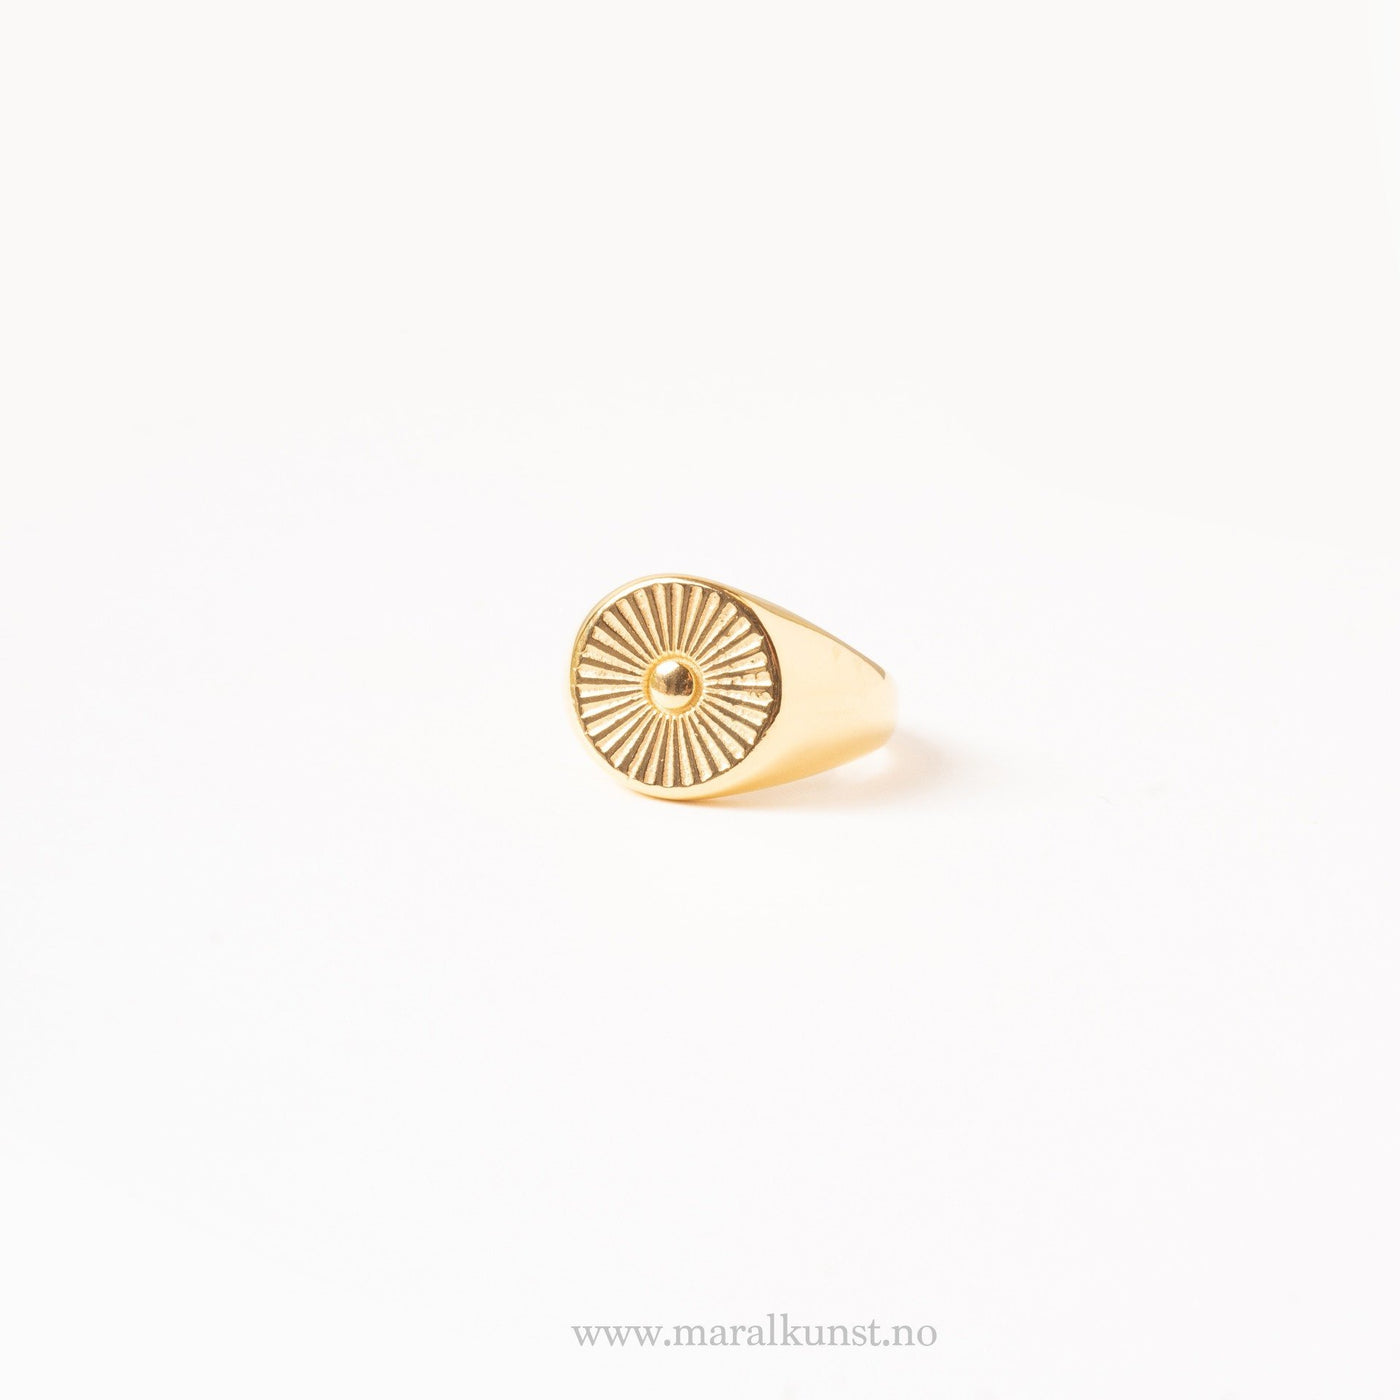 Gold Plated Sun Signet Ring - Maral Kunst Jewelry